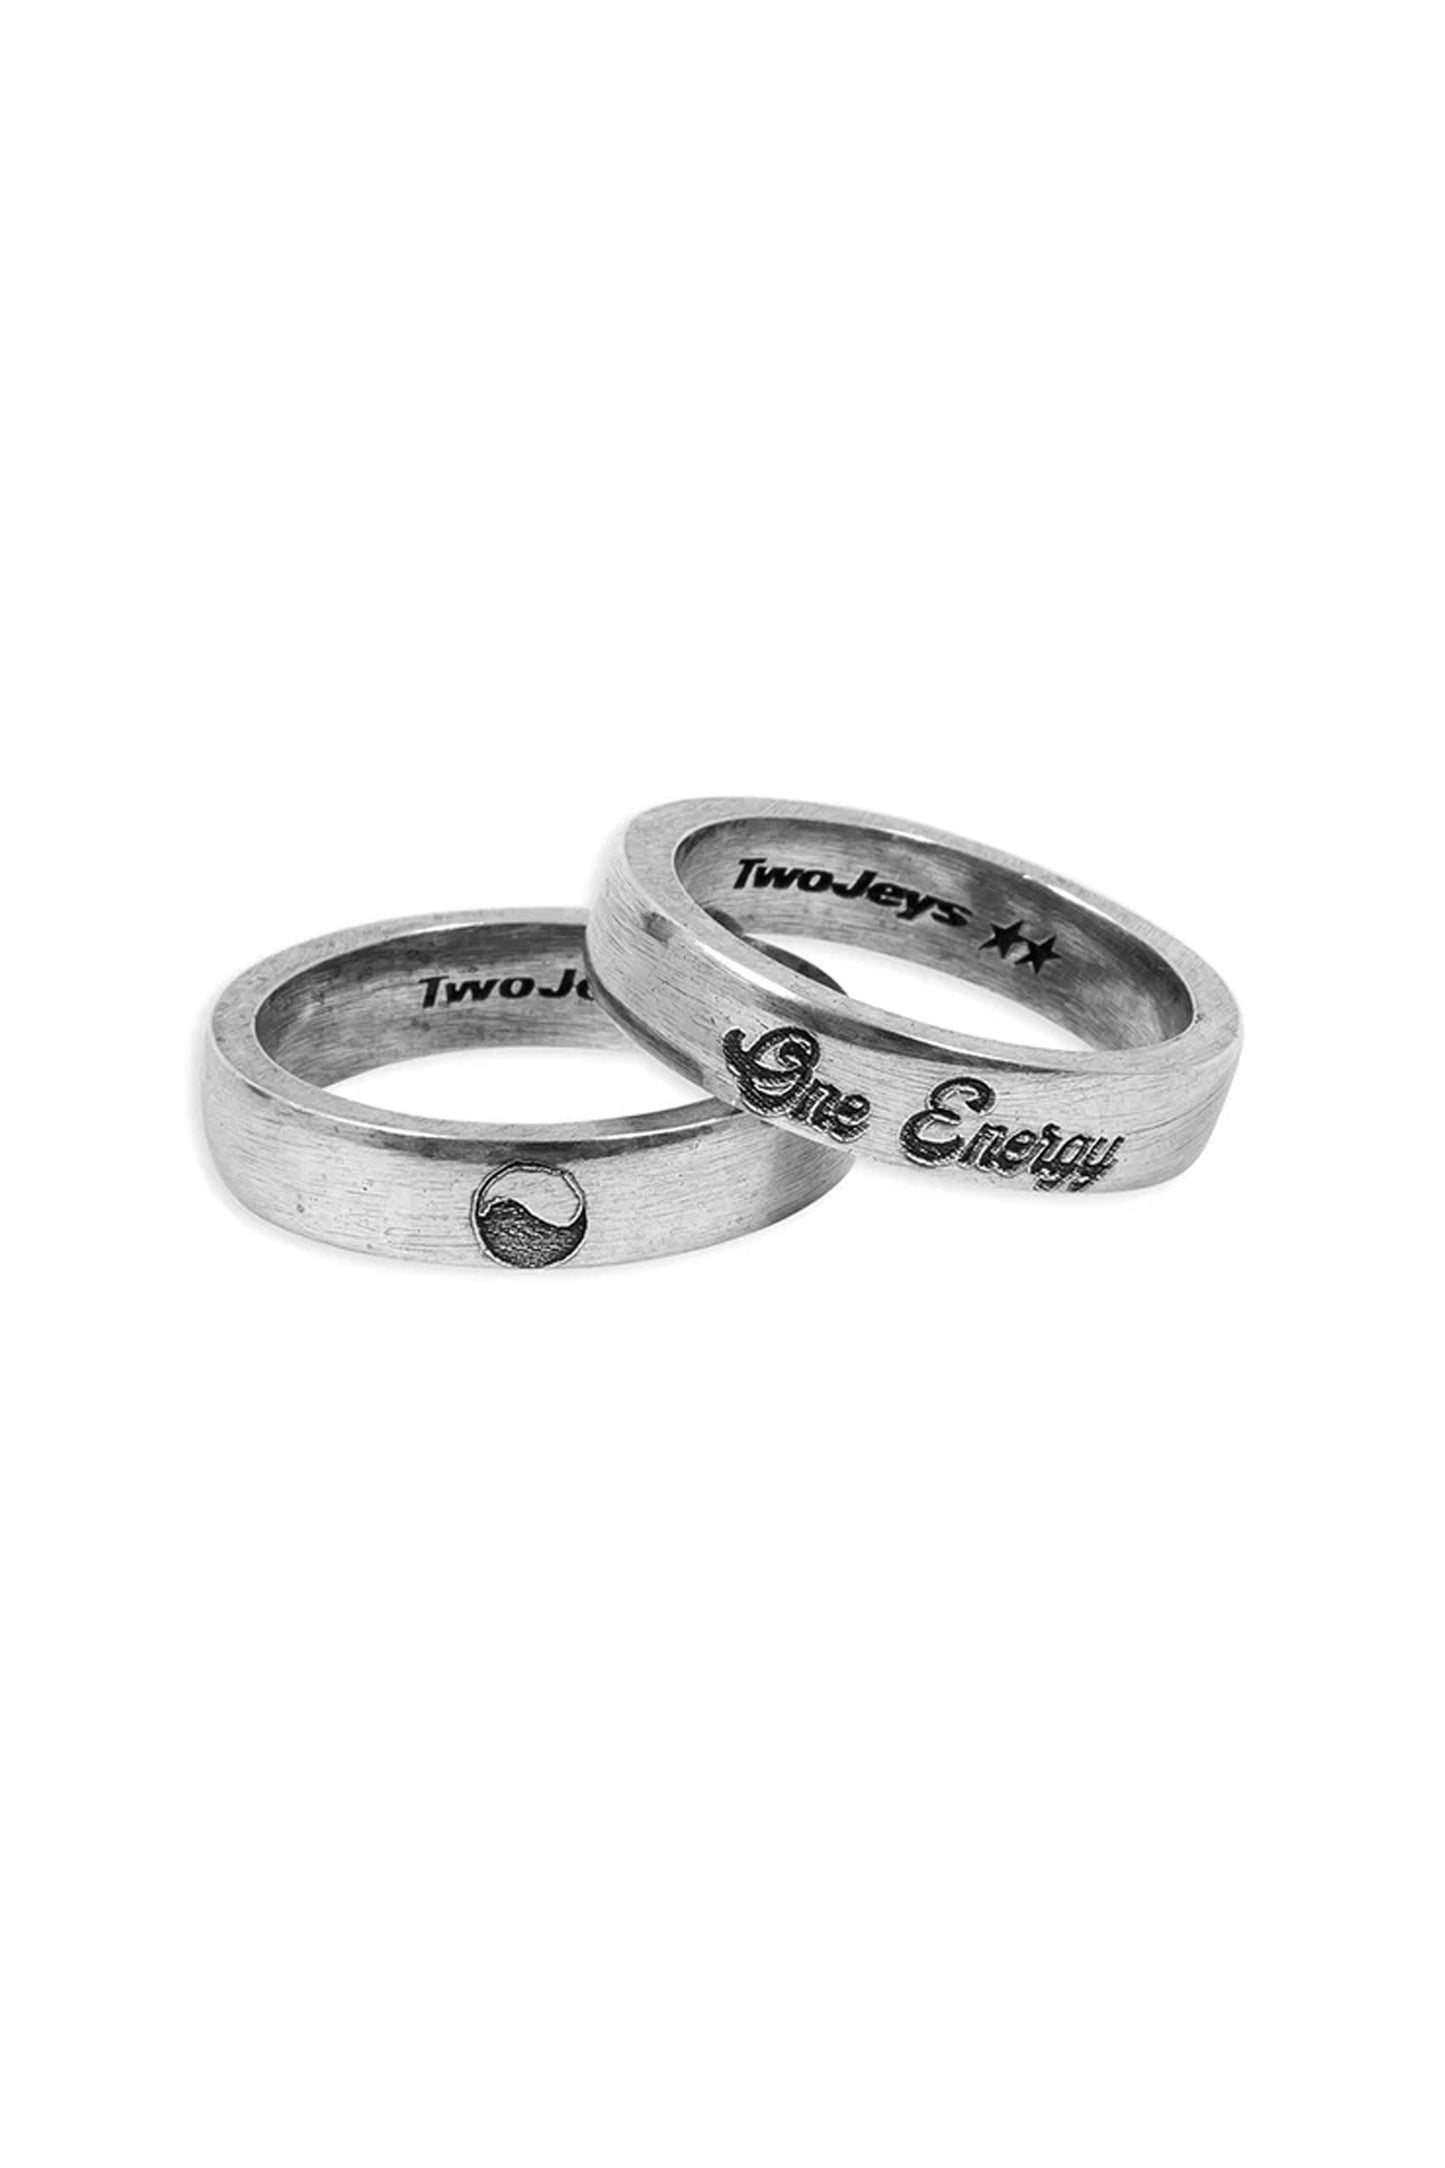 
                  
                    PUKAS-SURF-SHOP-RING-SET-TWO-JEYS-ONE-ENERGY
                  
                